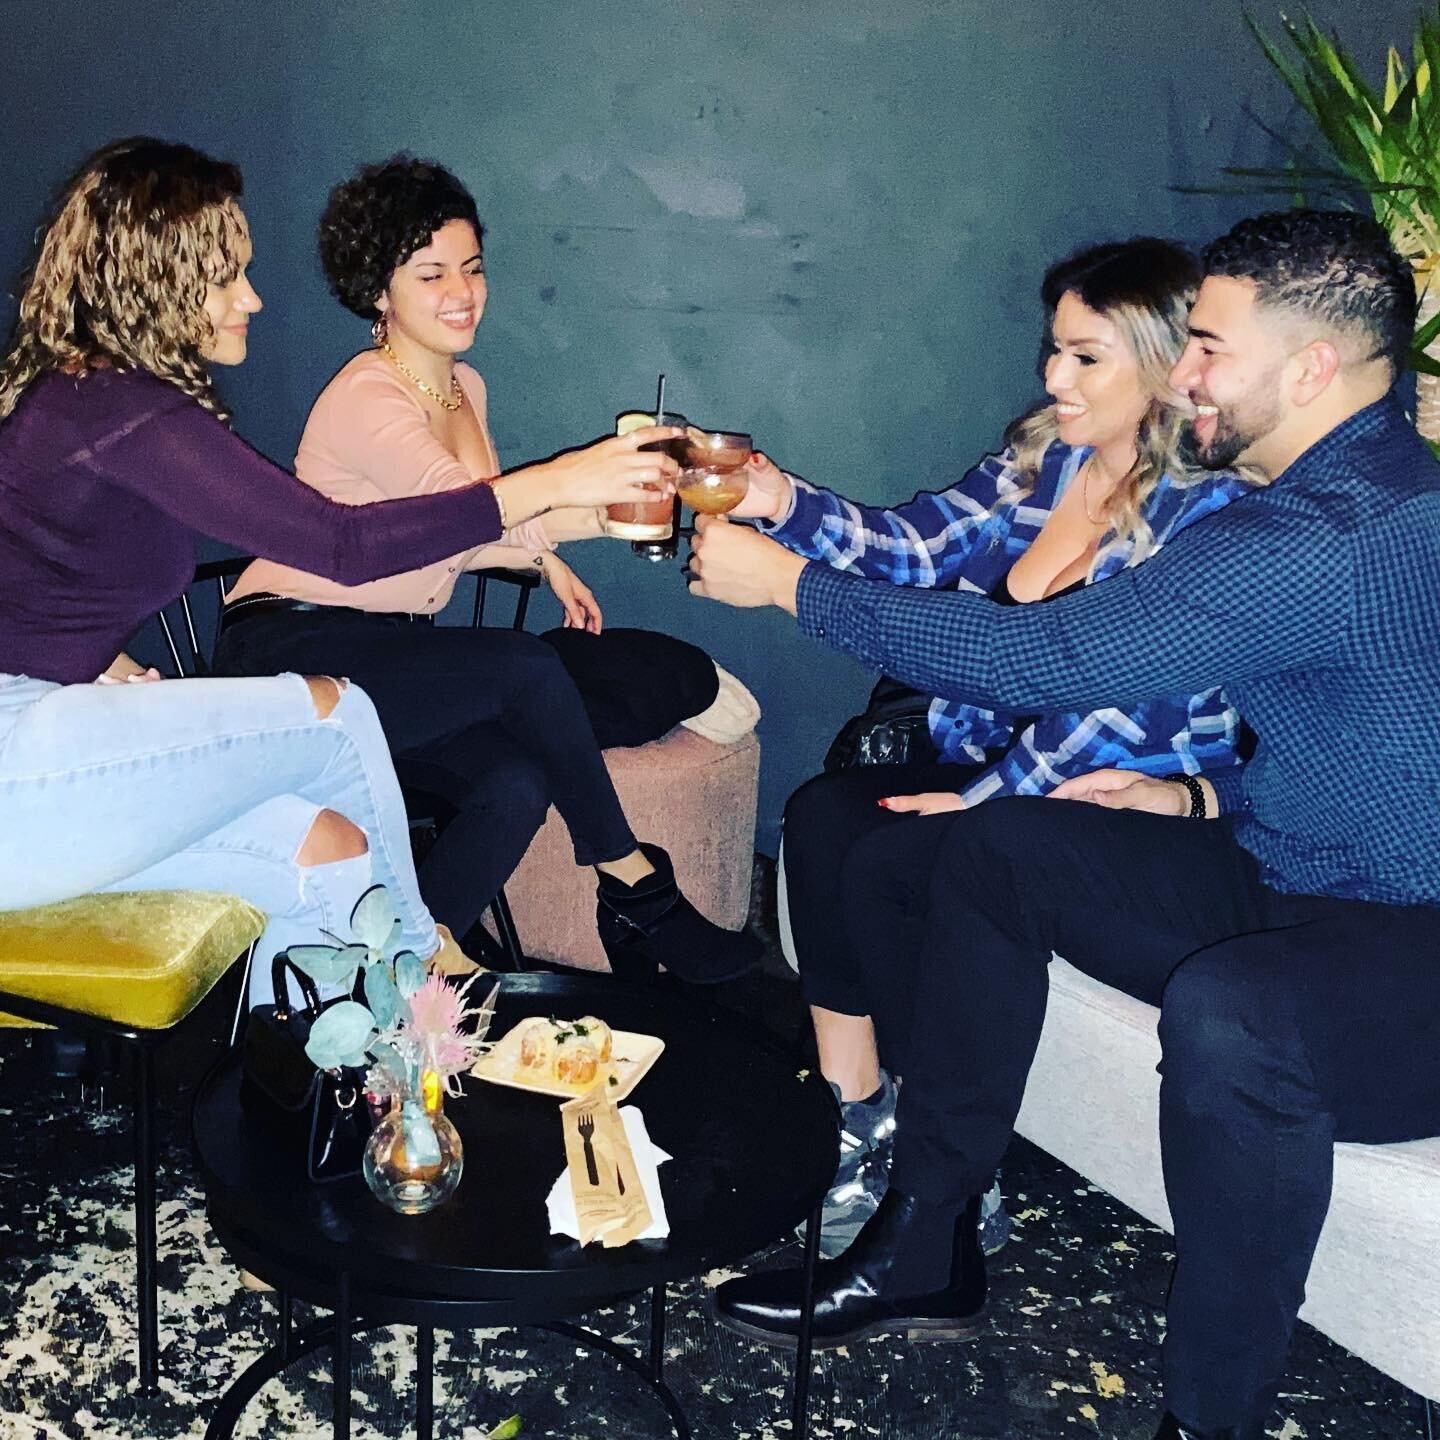 We know it&rsquo;s been a long week but IT&rsquo;S FRIDAY BK!  Grab your friends &amp; meet up to dine al fresco with a well deserved cocktail. Happy Hour from 4-7pm